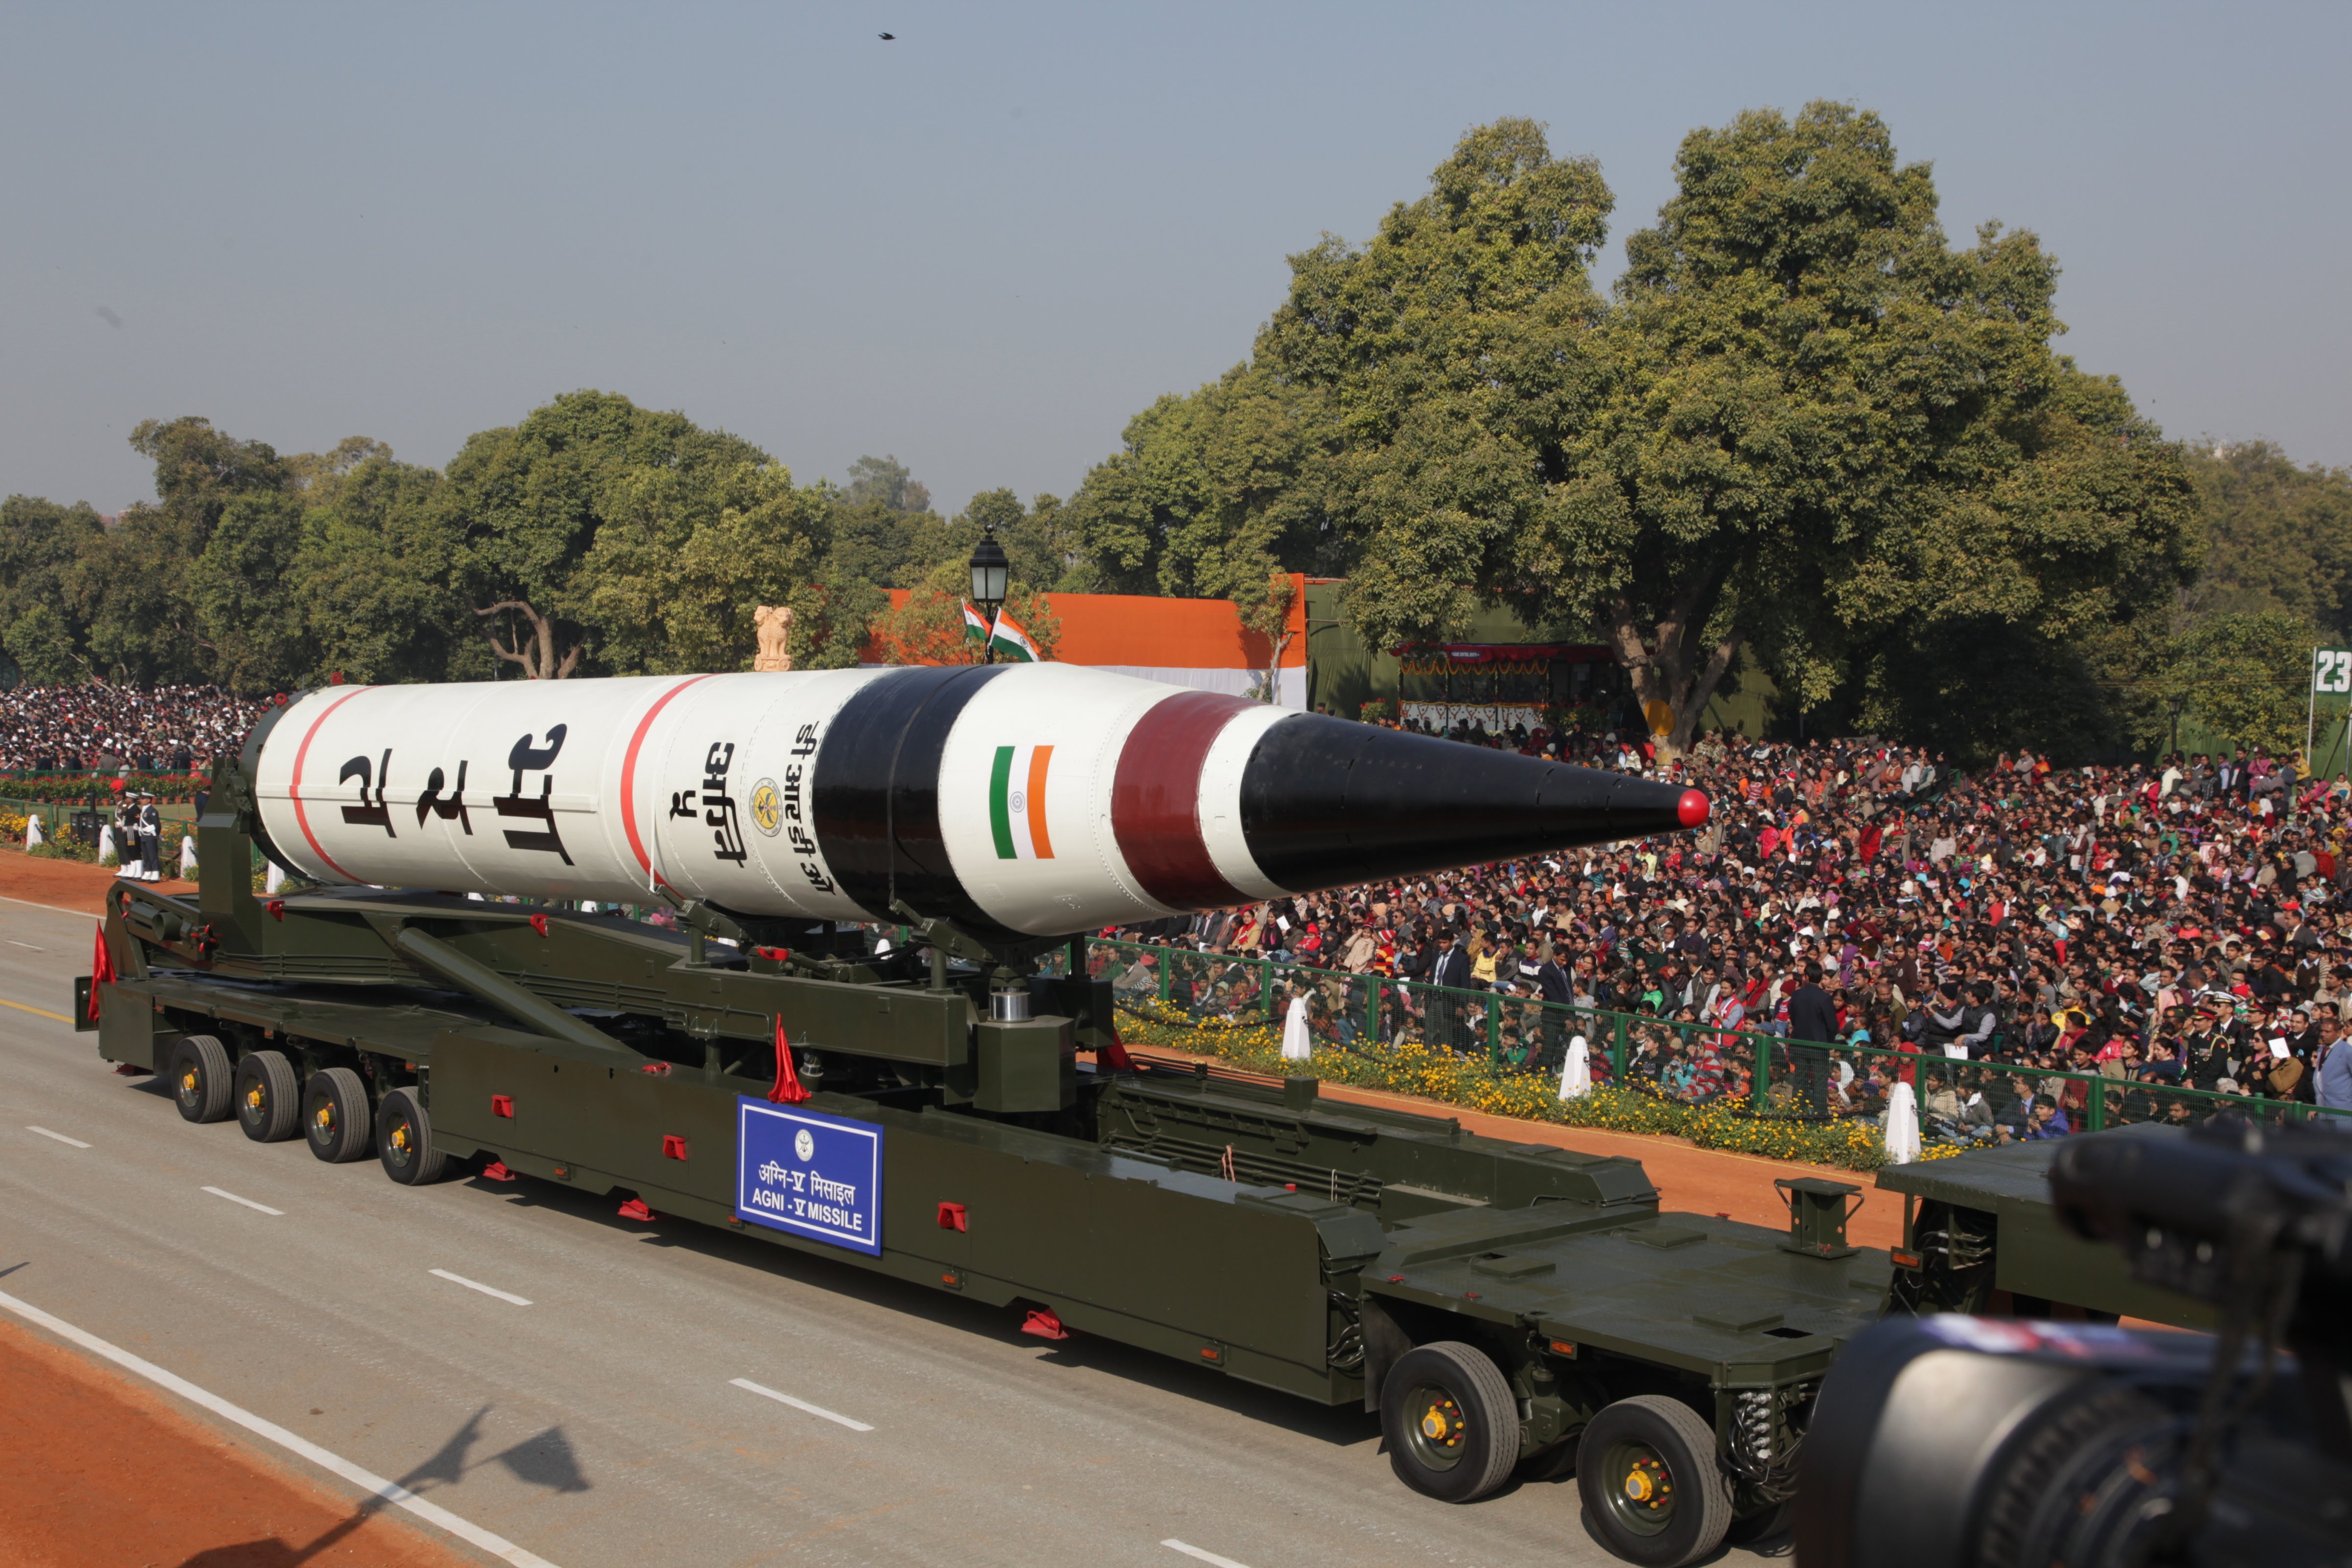 India's long range Agni-5 ballistic missile, seen as part of a 65th Republic Day parade in New Delhi on Jan. 26, 2013. (Pallava Bagla—Corbis/Getty Images)